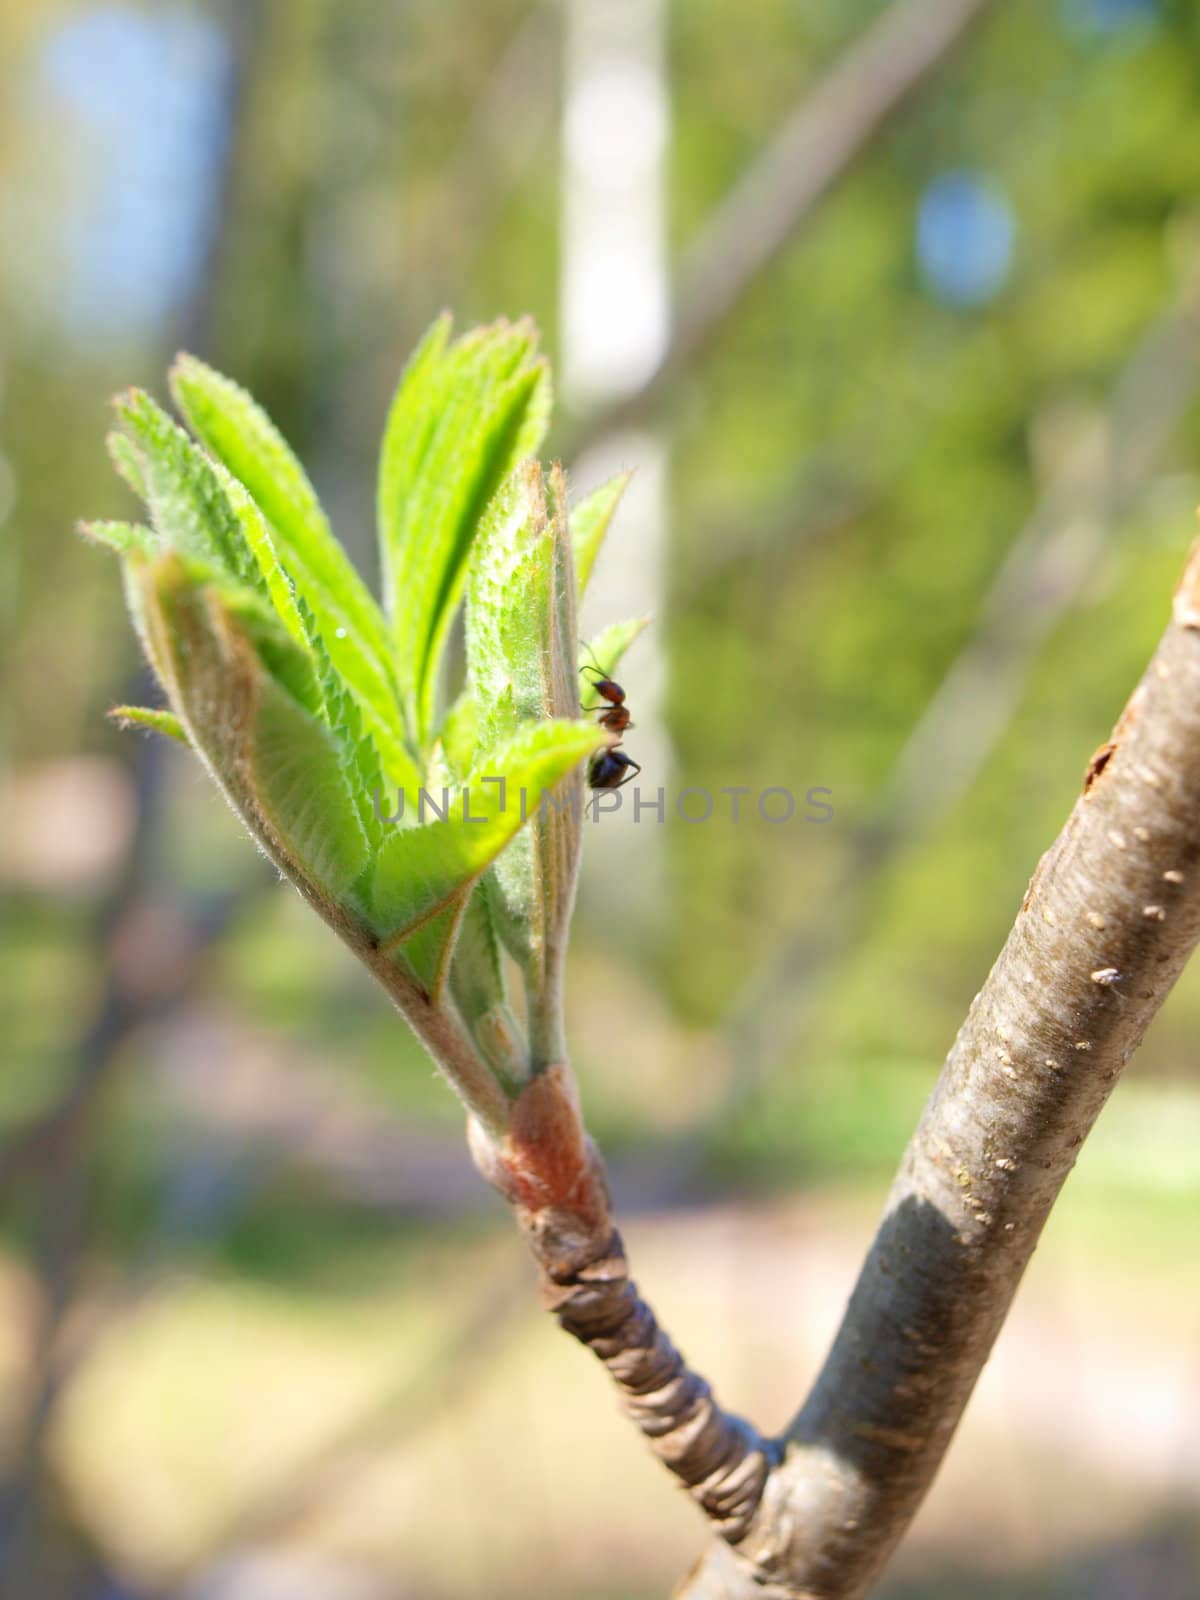 An ant climbing on a fresh green leaf on a tree at spring